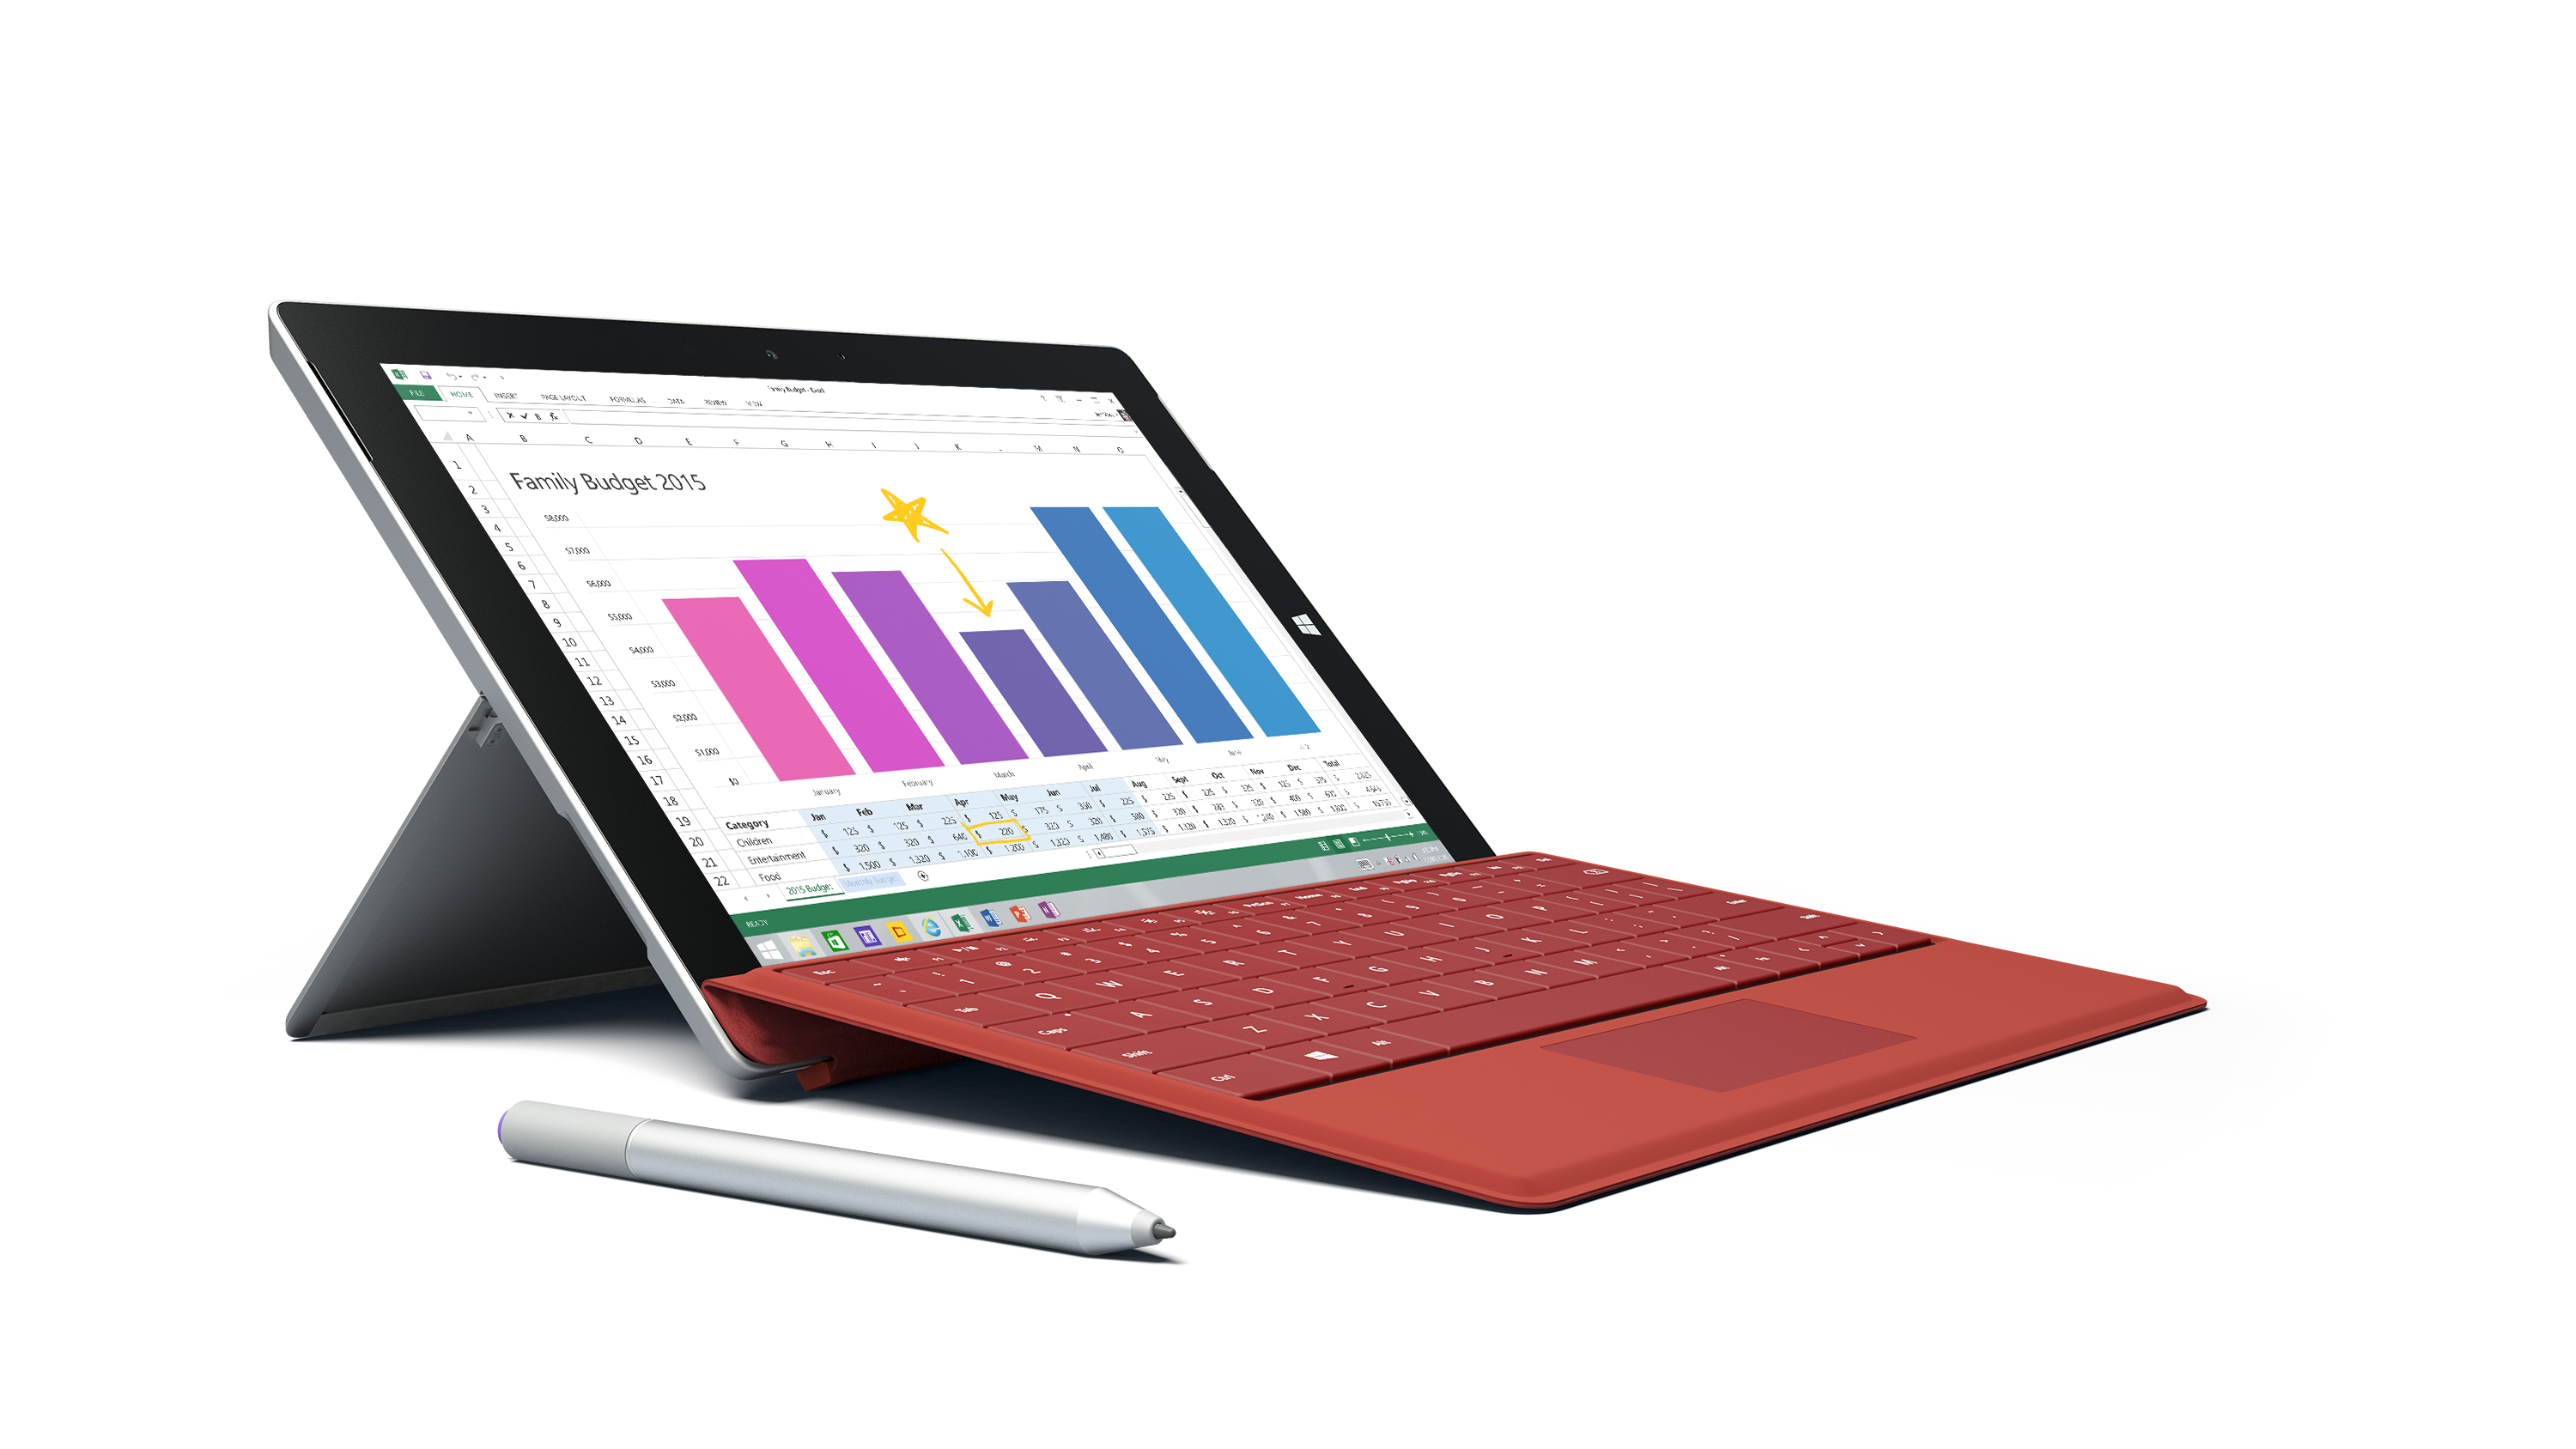 Microsoft Surface 3 to be discontinued at the end of this year